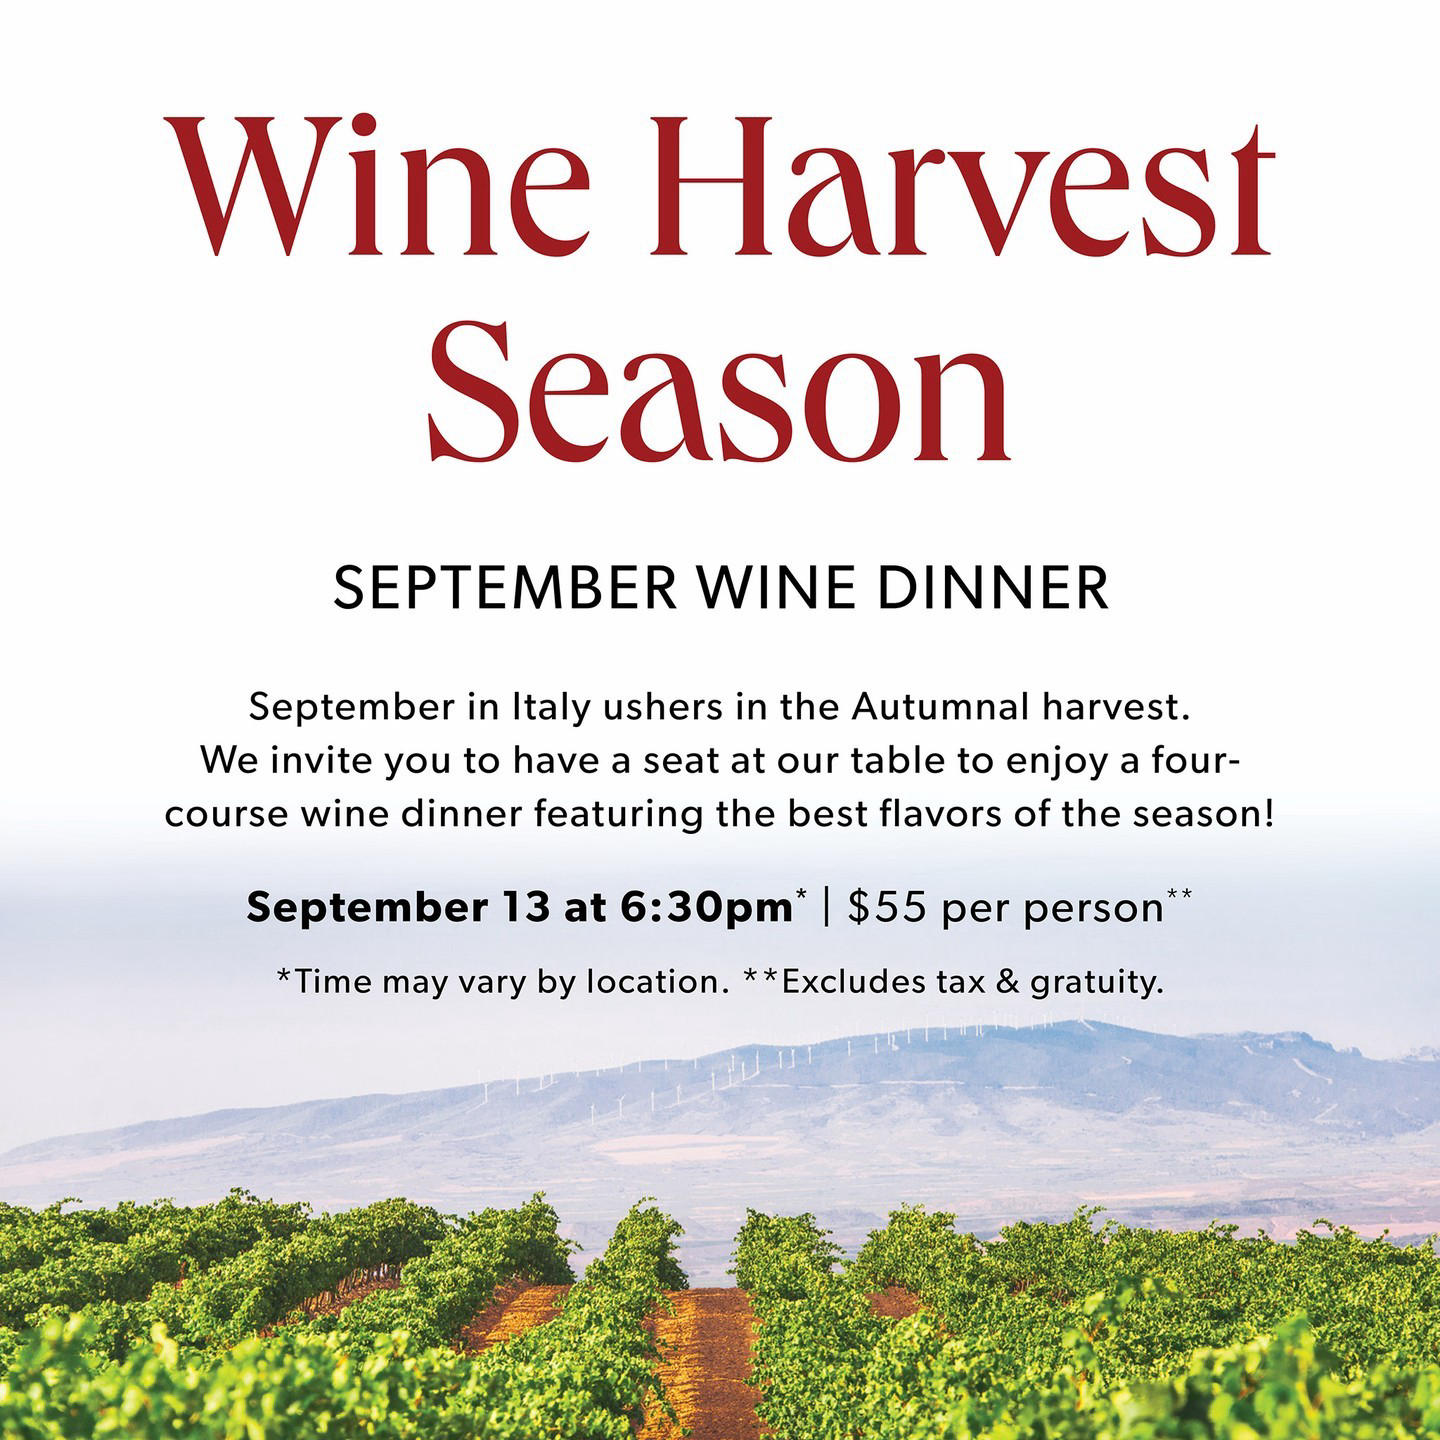 Carrabba's Italian Grill - You're invited to our Wine Harvest Season wine dinner on Sept 13th